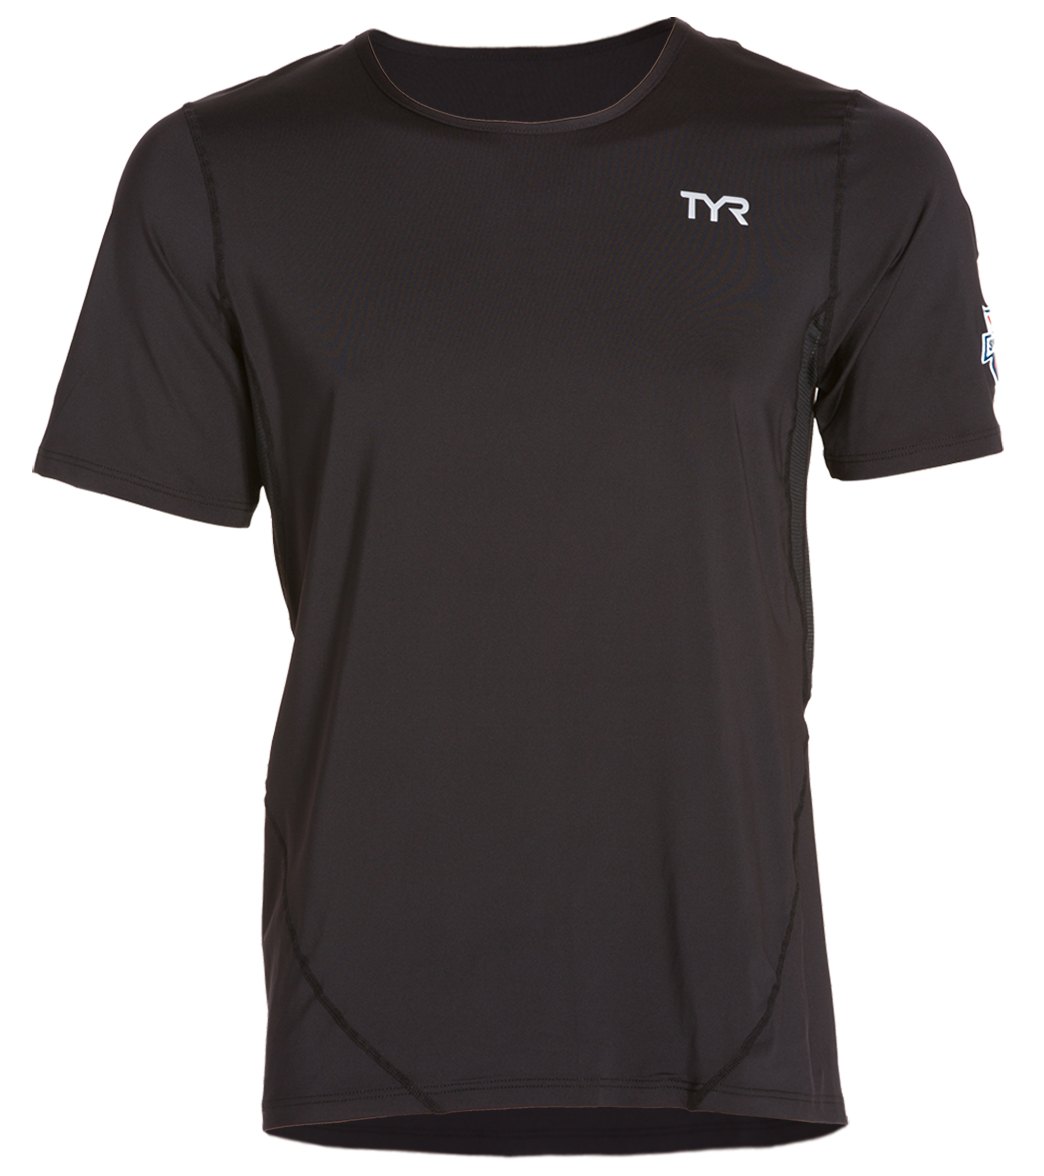 TYR USA Swimming All Elements Men's Running Tee at SwimOutlet.com